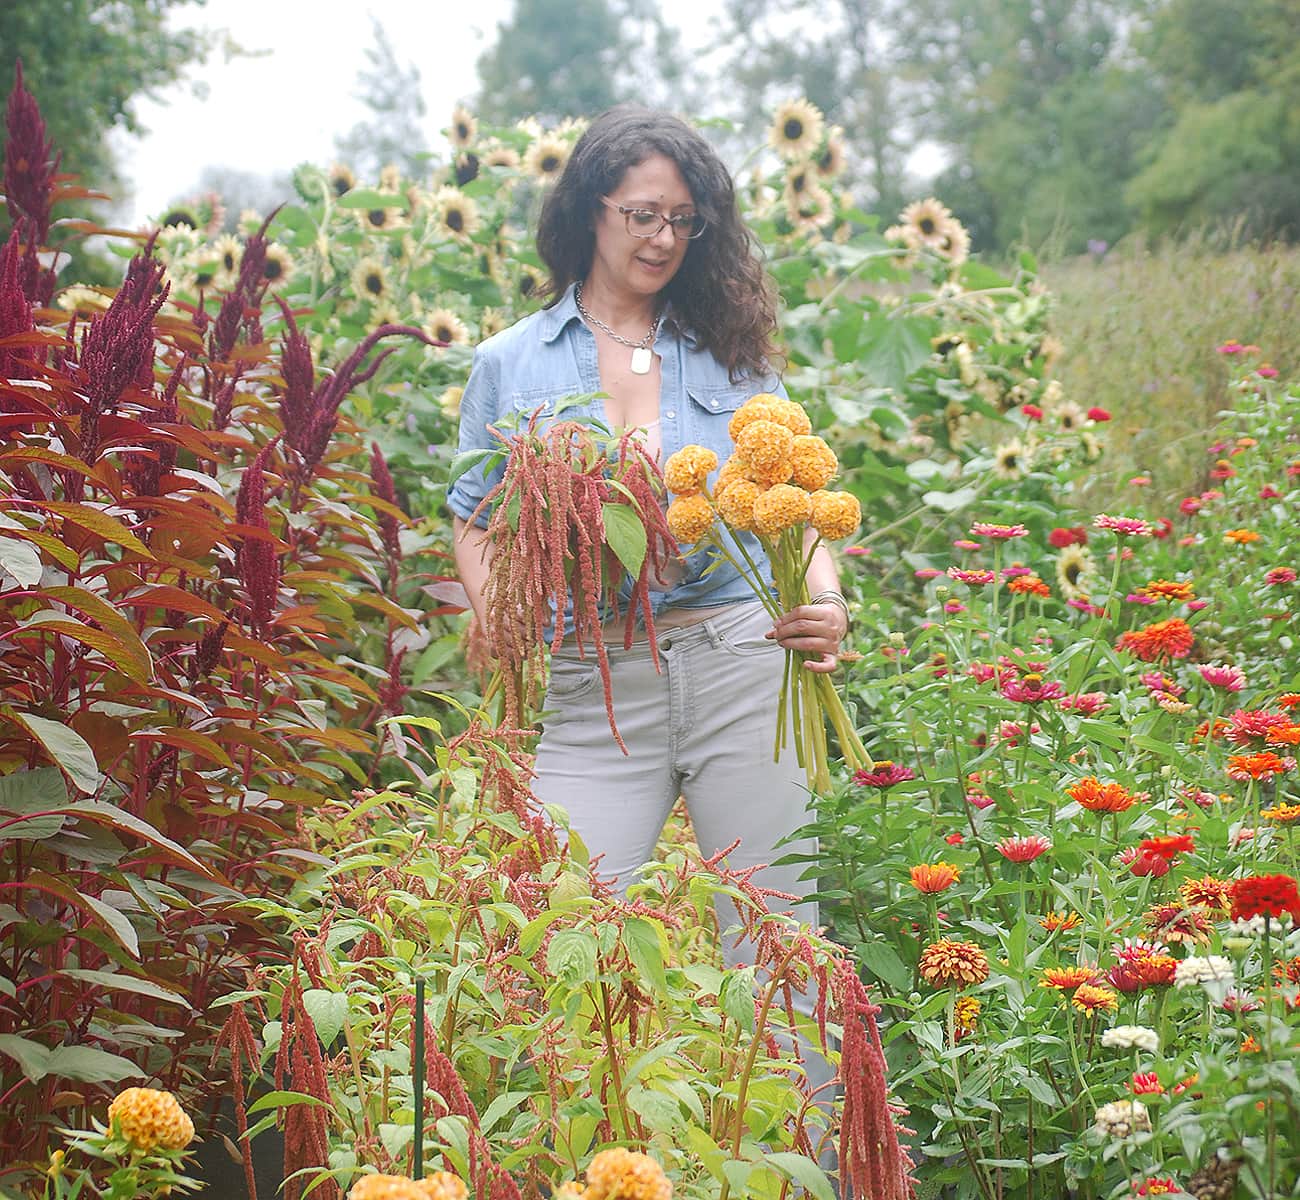 A florist standing in her flower field and holding picked stems she uses in her Uxbridge flower shop for arrangements.